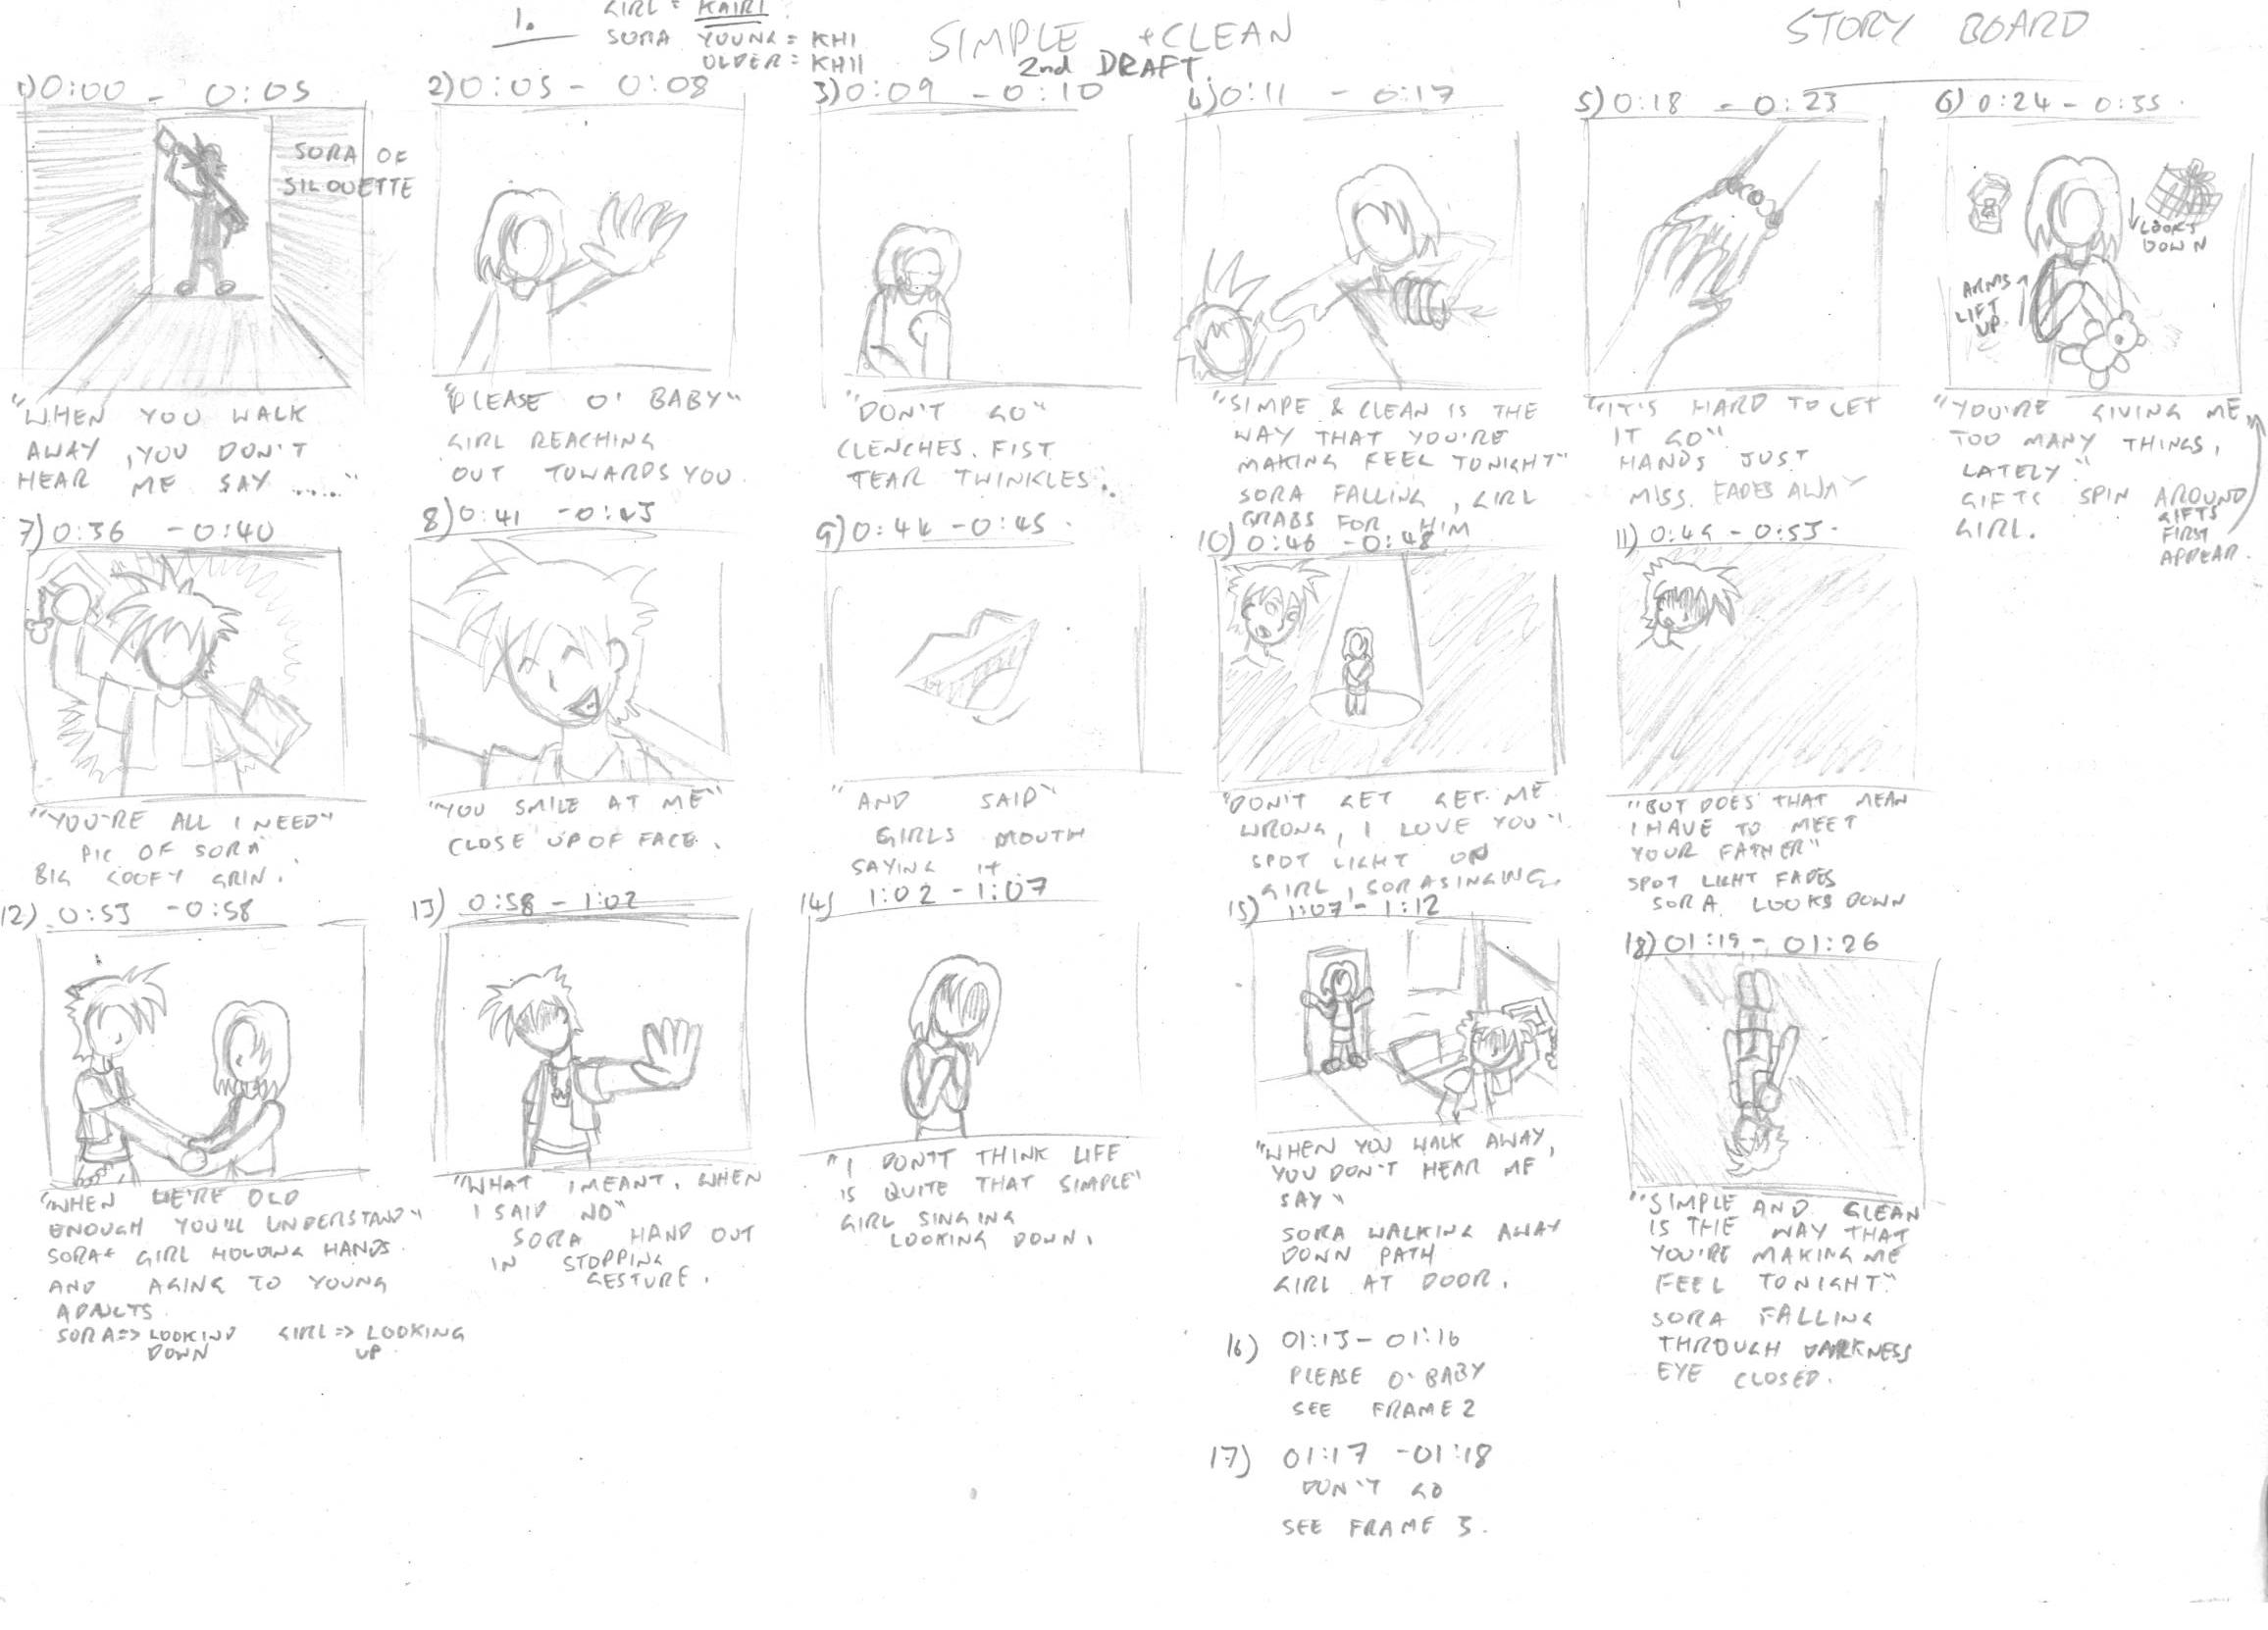 Simple and Clean Story Board Page 1 by Galaxialconda